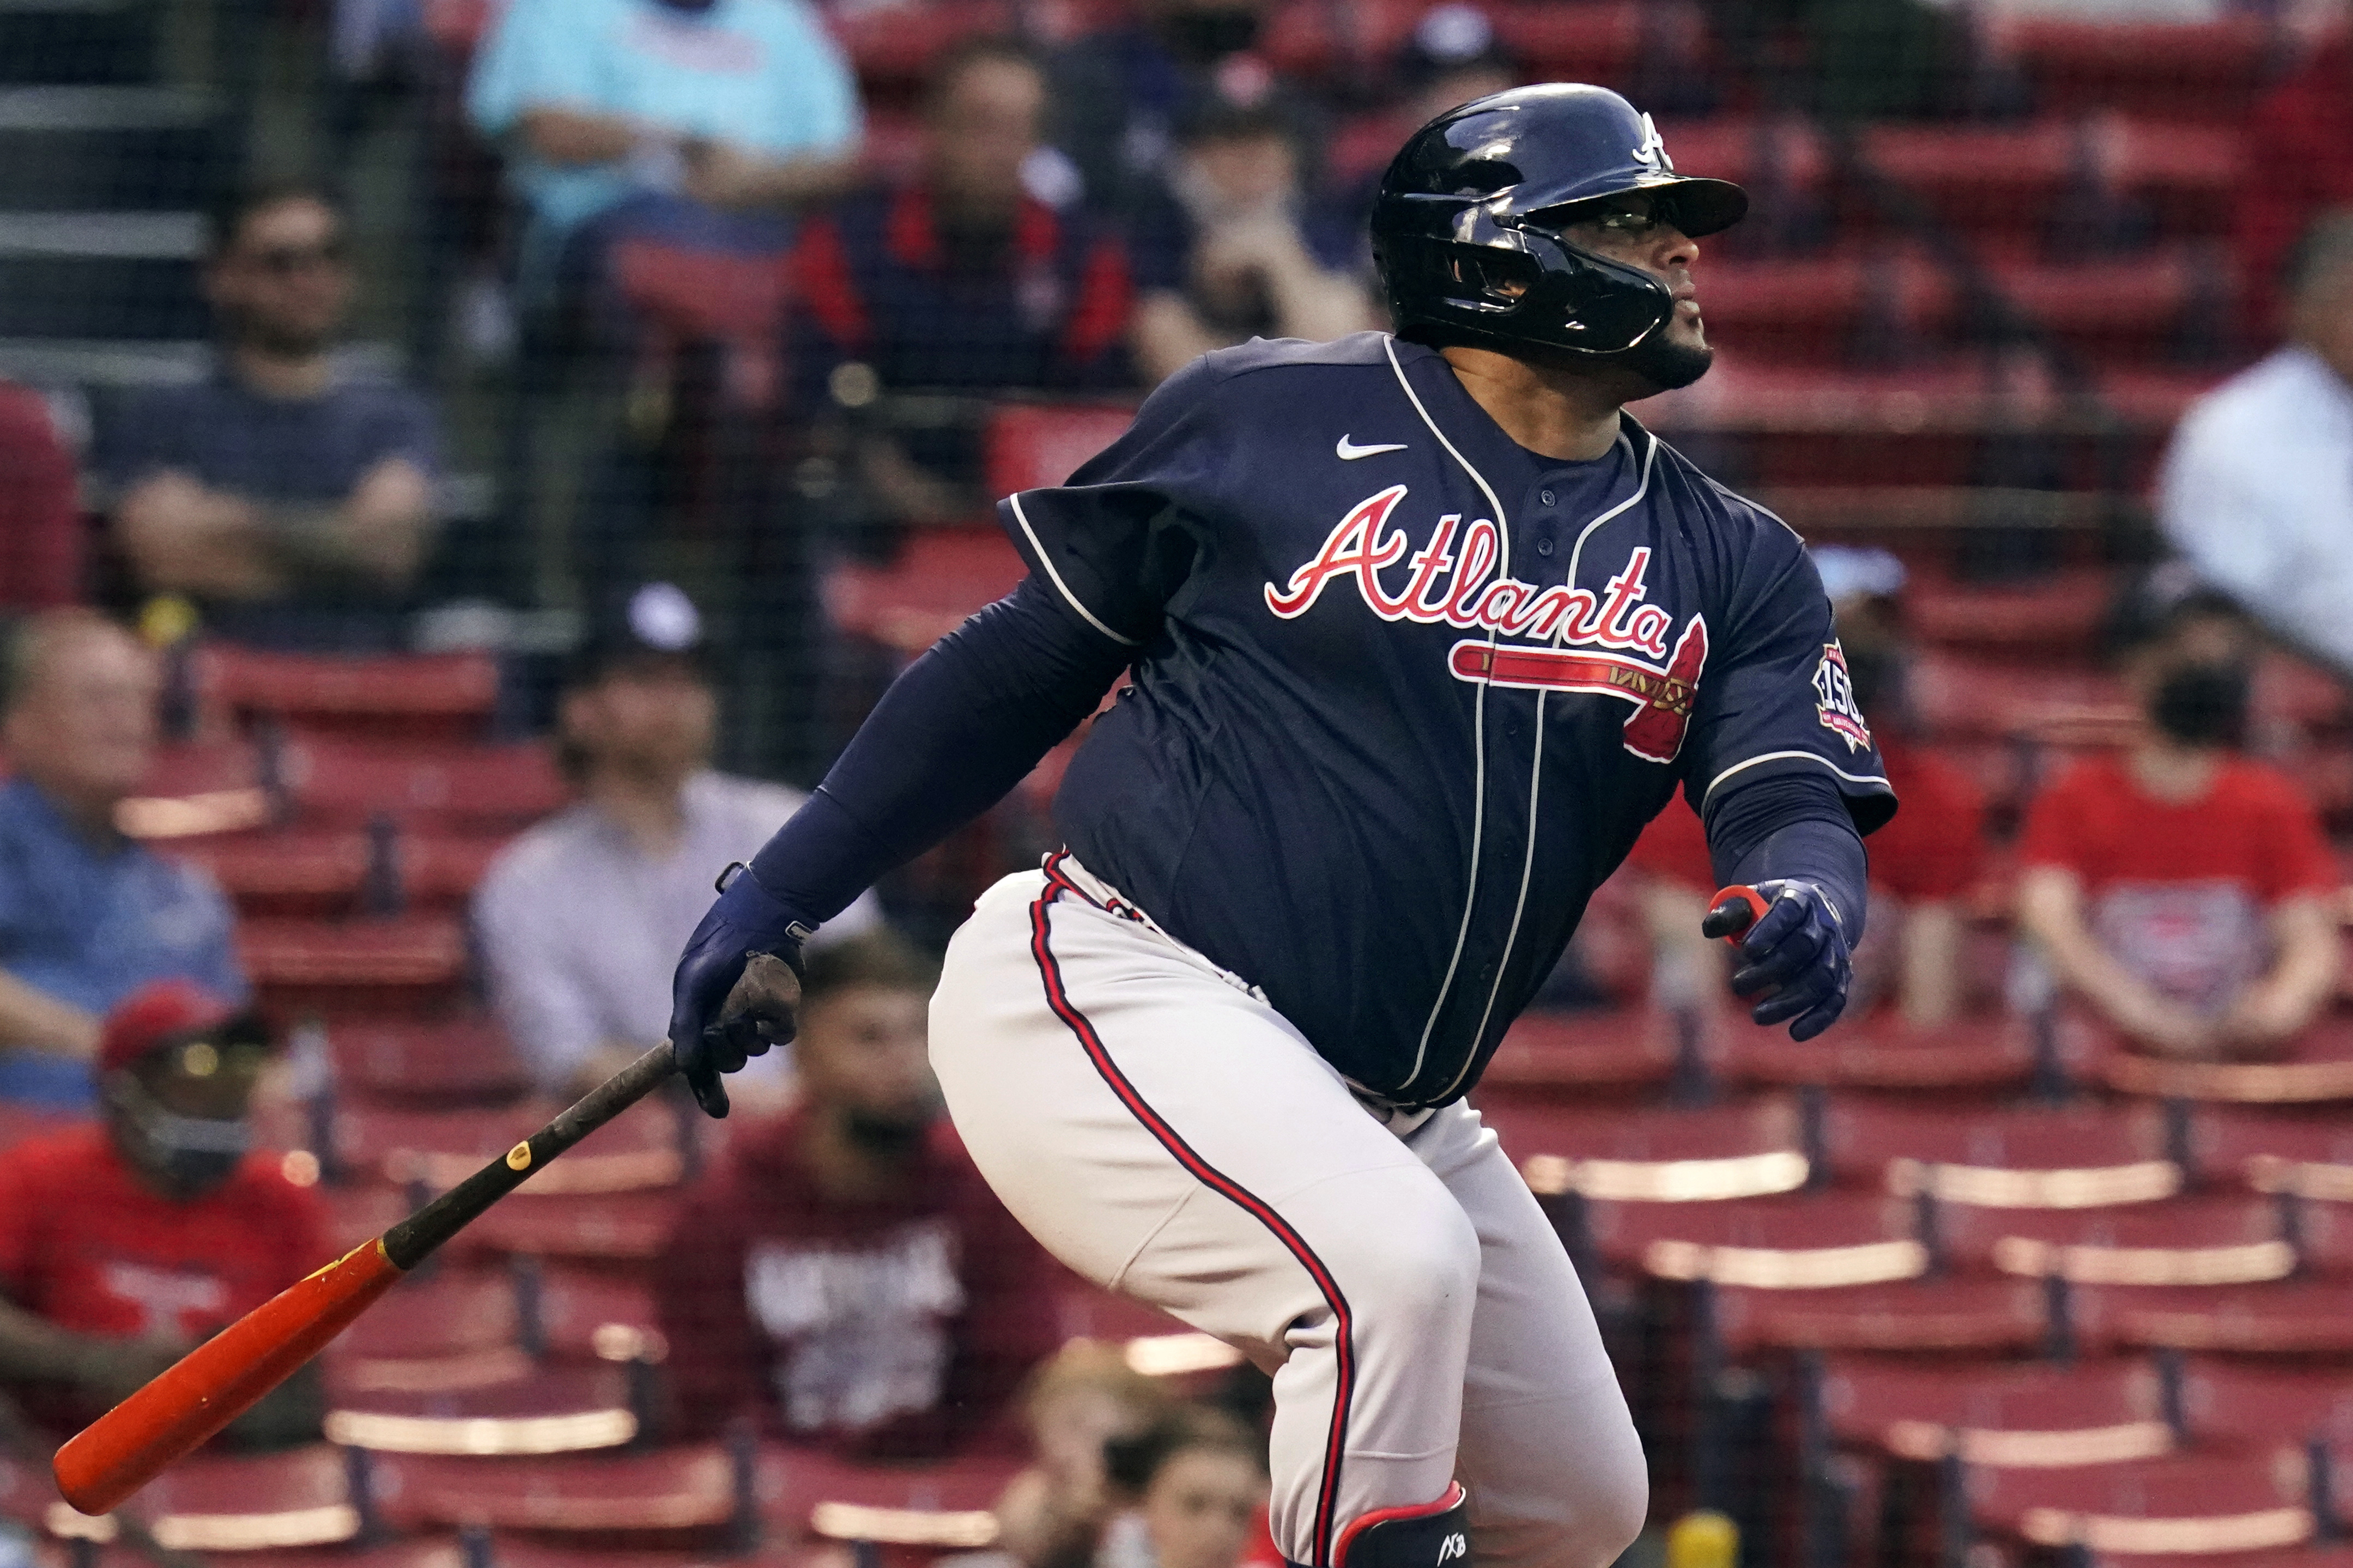 Pinch me! Pablo Sandoval still making history with Braves